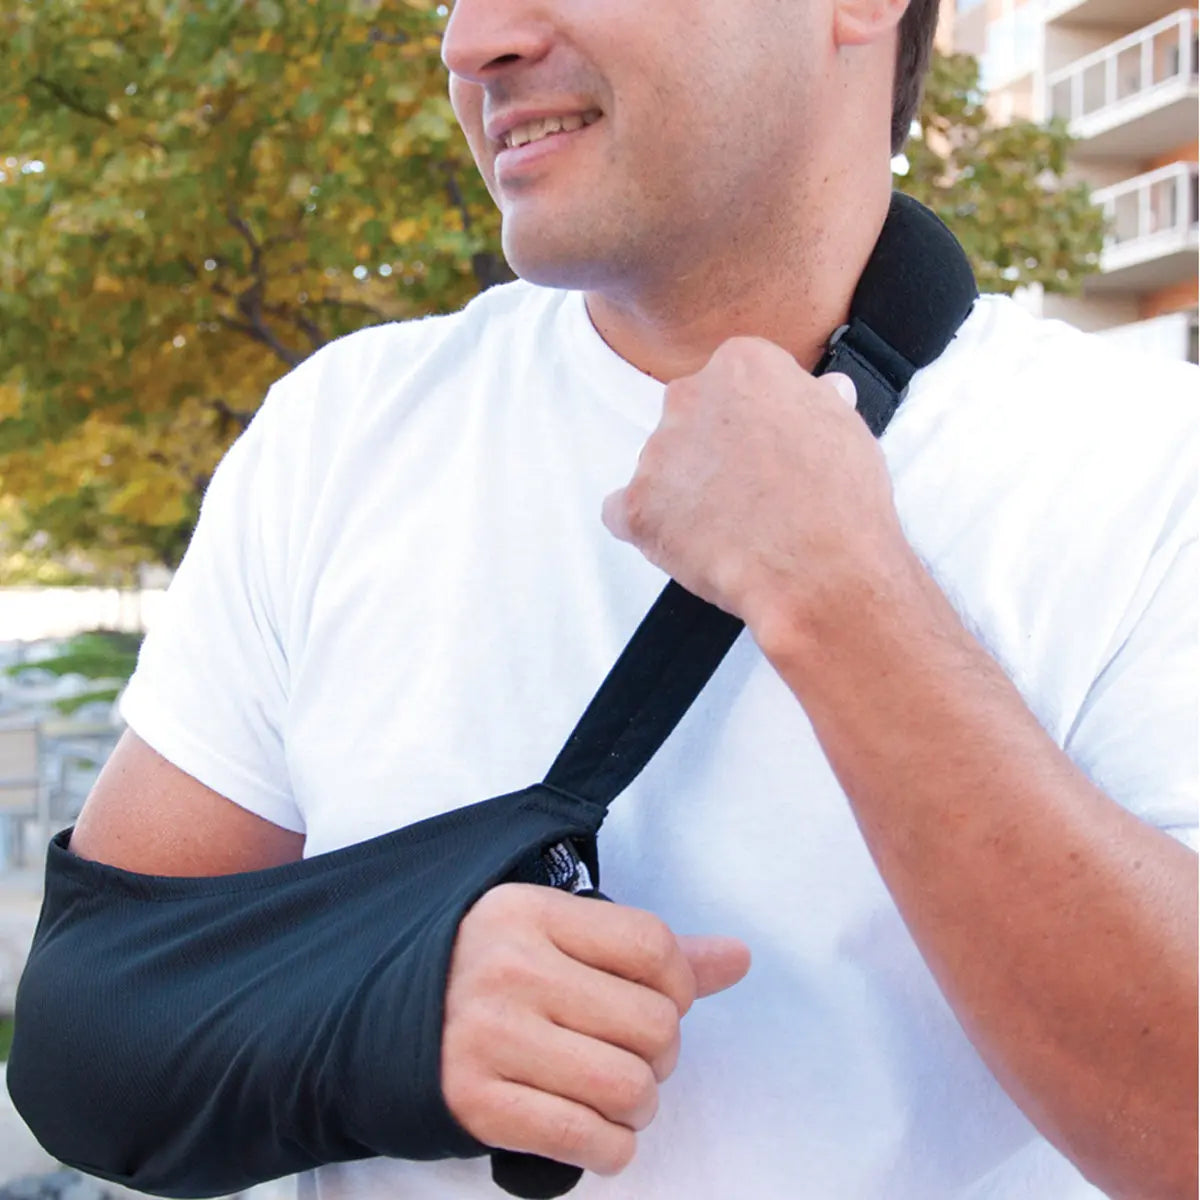 Brownmed IMAK RSI Arm Sling with Immobilizer - Universal - Black IMAK